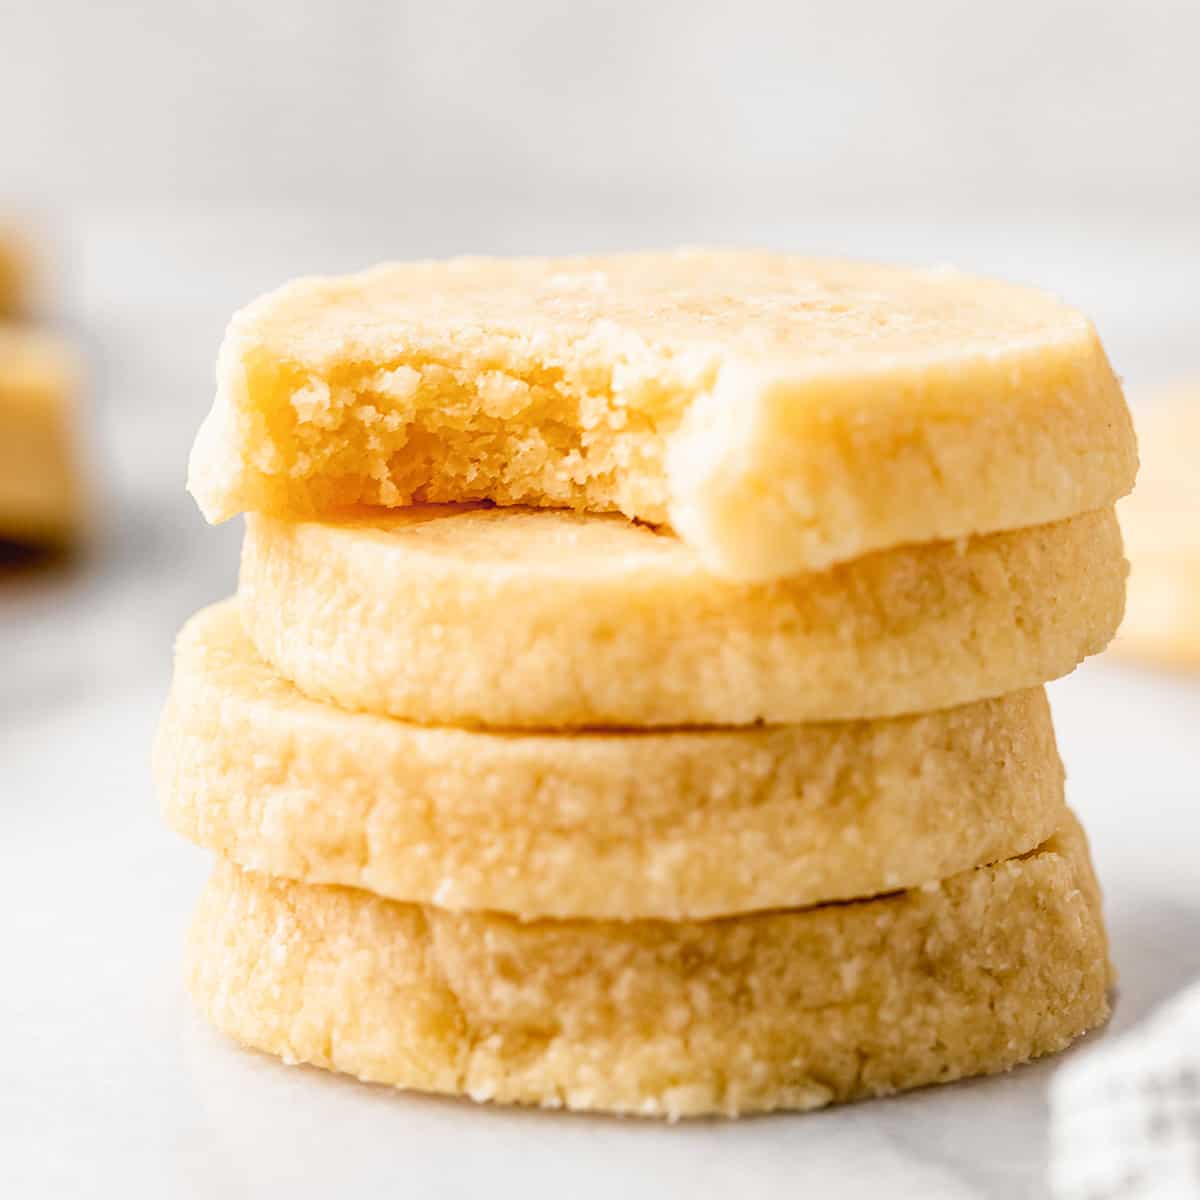 stack of 4 Shortbread Cookies, top one has a bite taken out of it